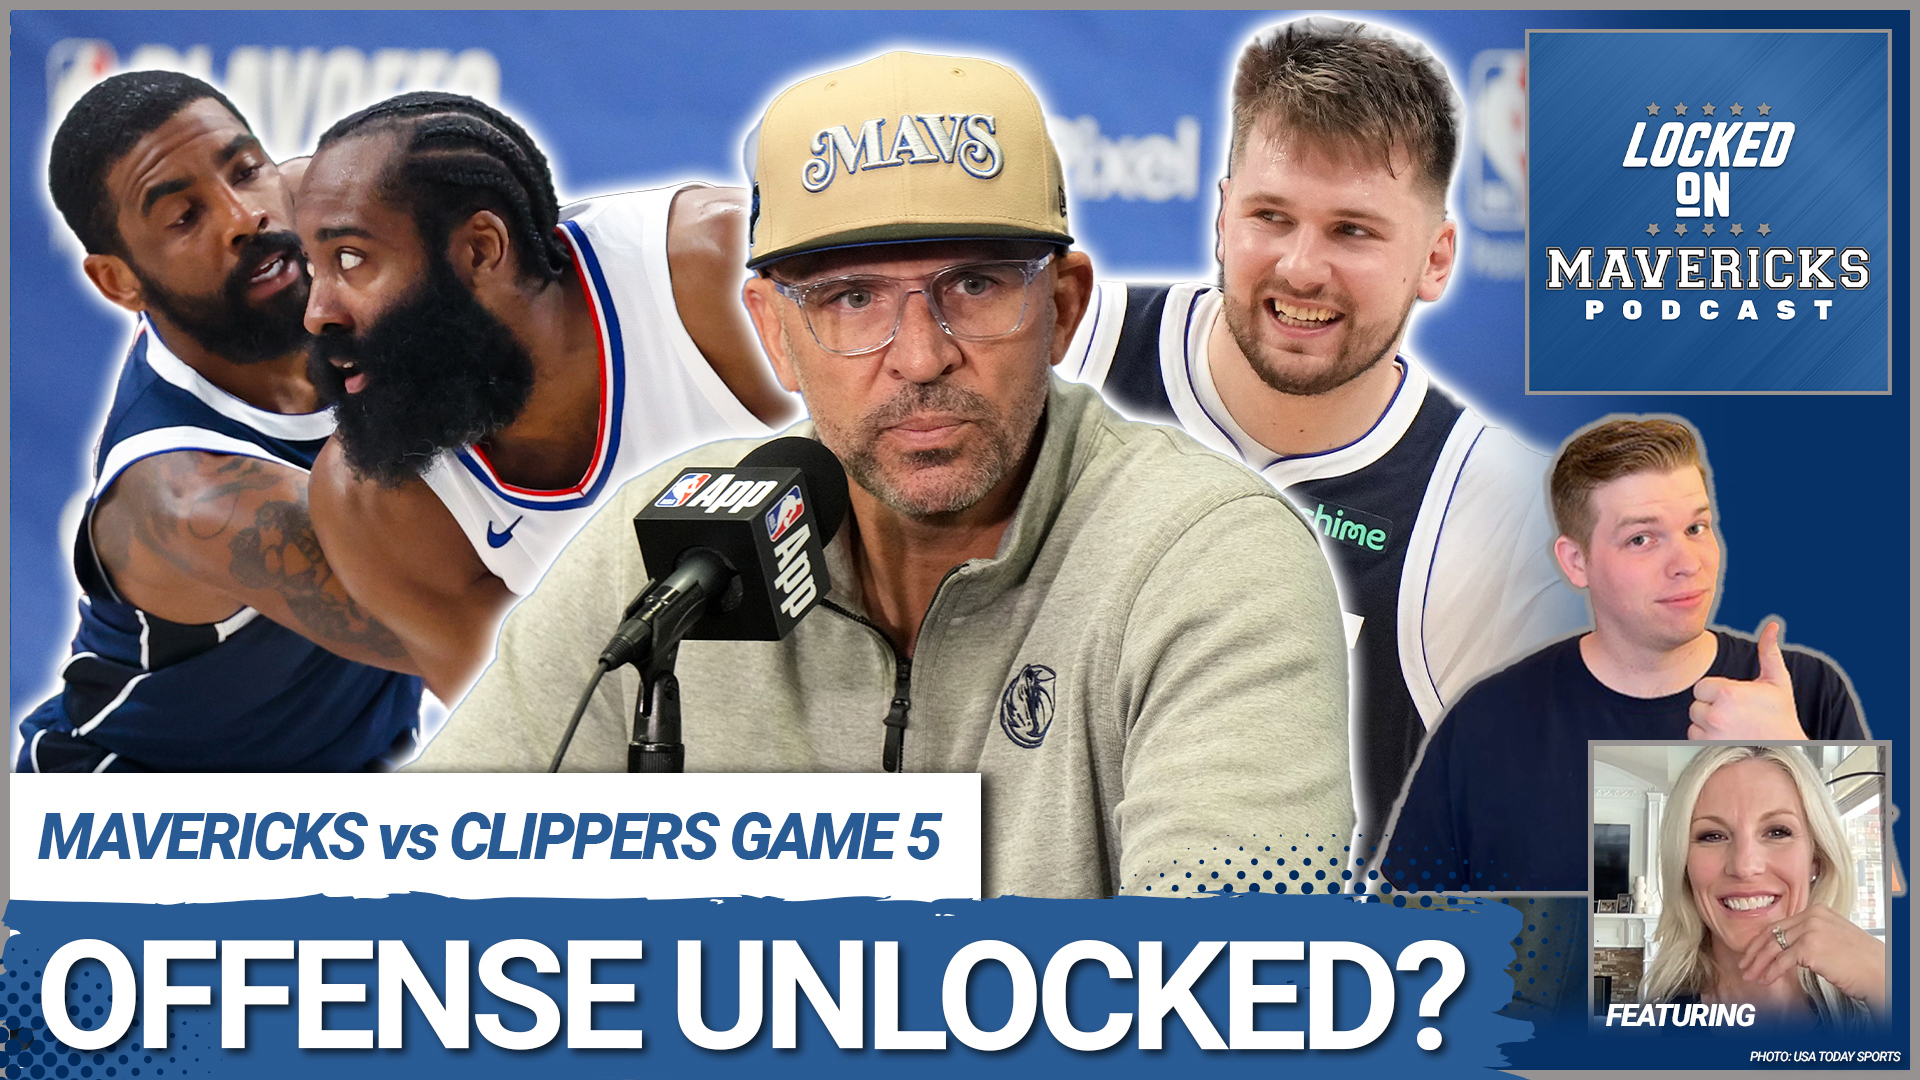 Nick Angstadt & Dana Larsen share how Luka Doncic, Kyrie Irving, and the Dallas Mavericks unlocked their offense in the last 3 games against the Clippers.